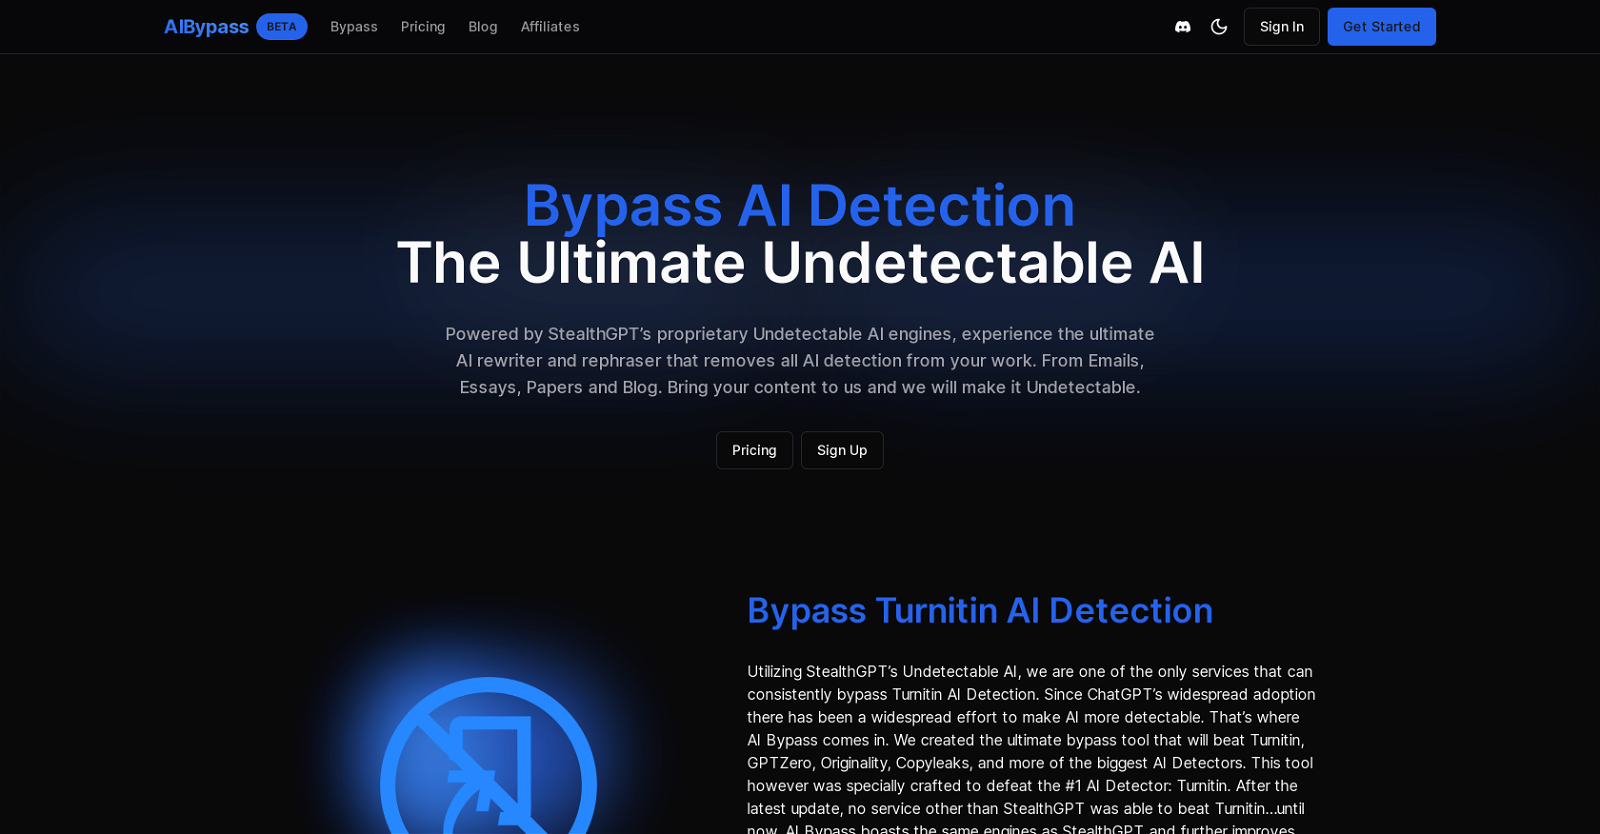 AIBypass website